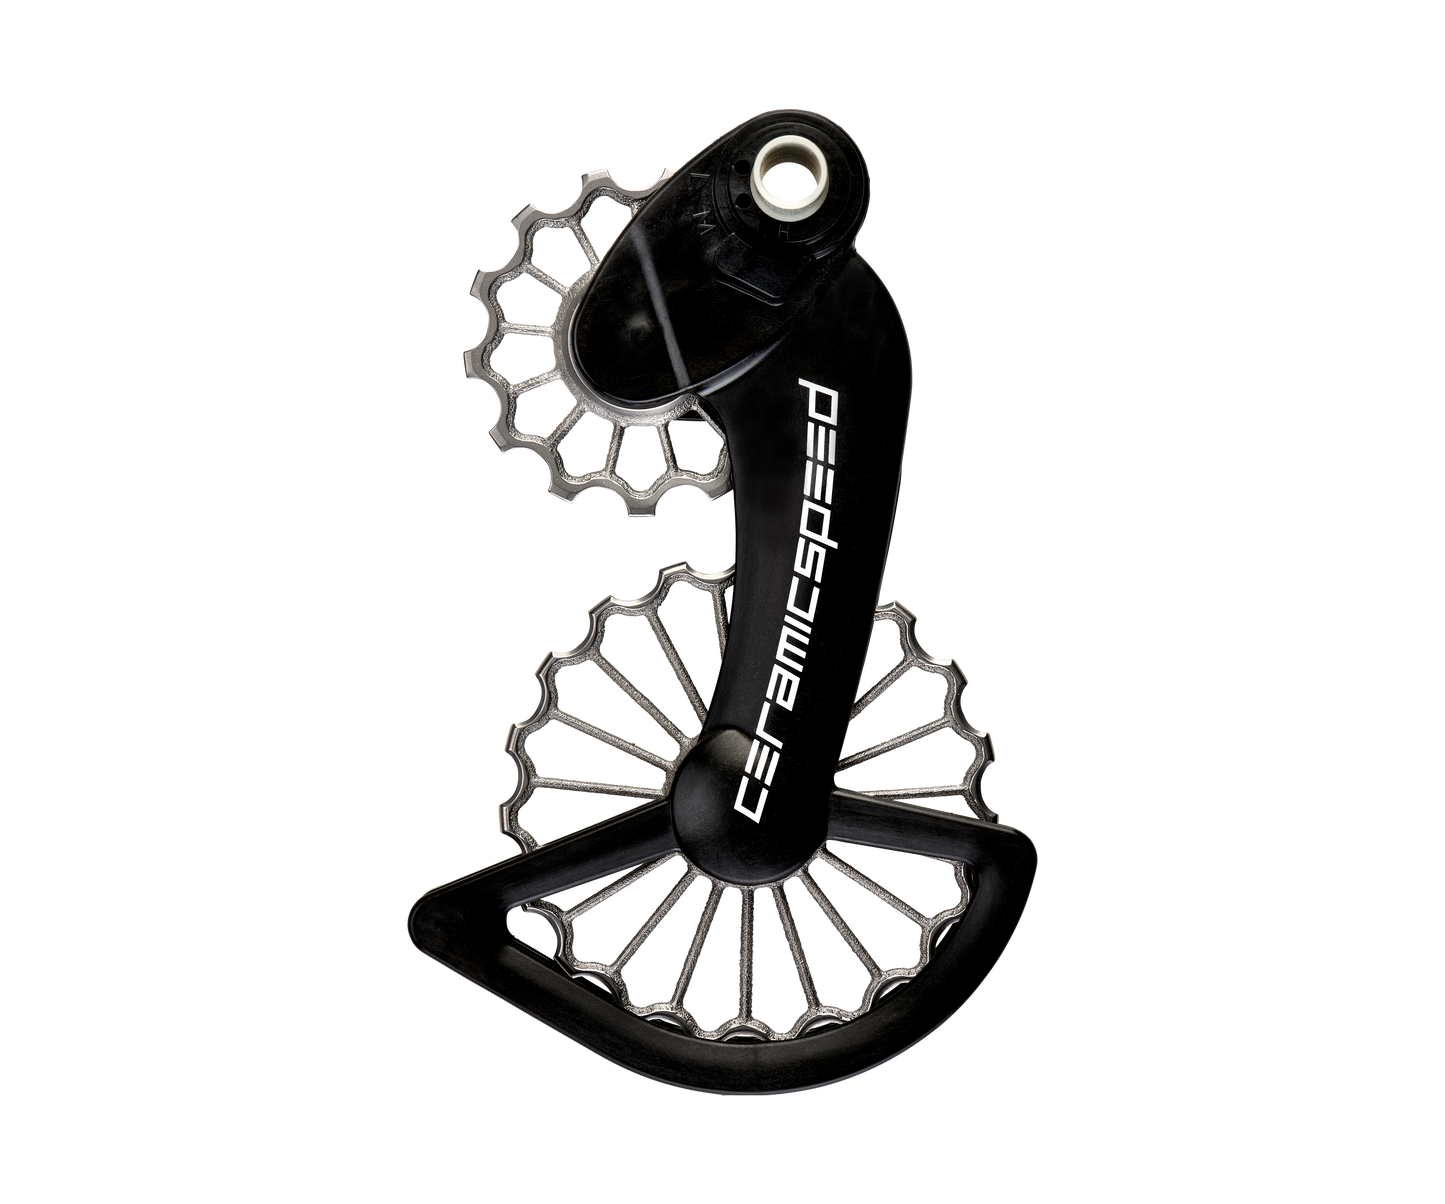 3D Printed Ti OSPW for Campagnolo 11-speed Mechanical & EPS